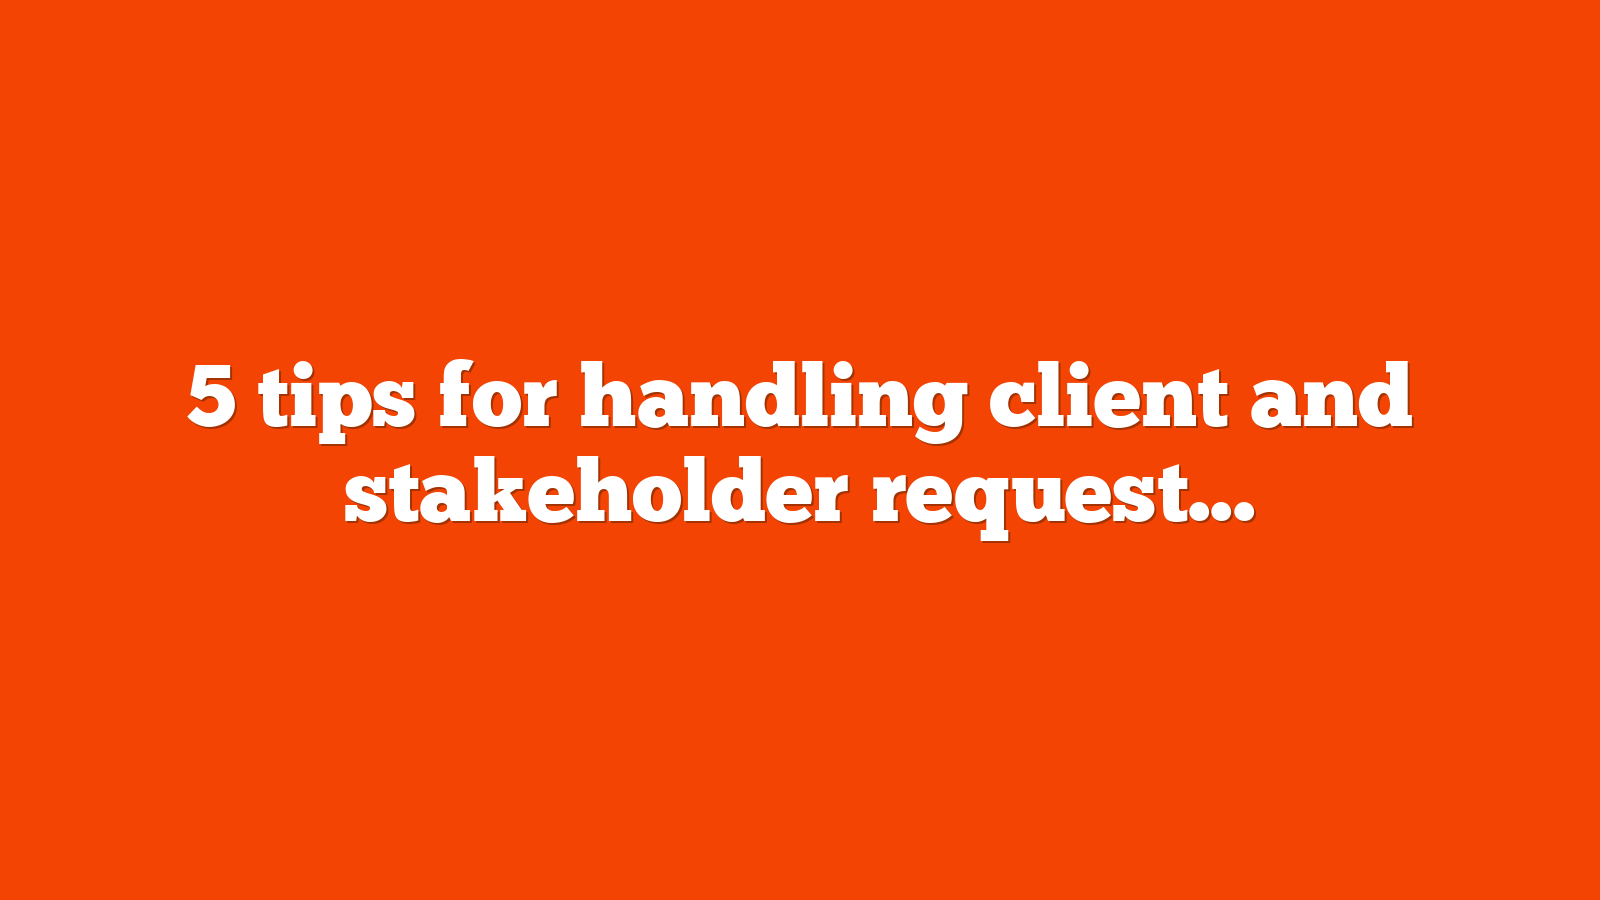 5 tips for handling client and stakeholder requests for PPC projects